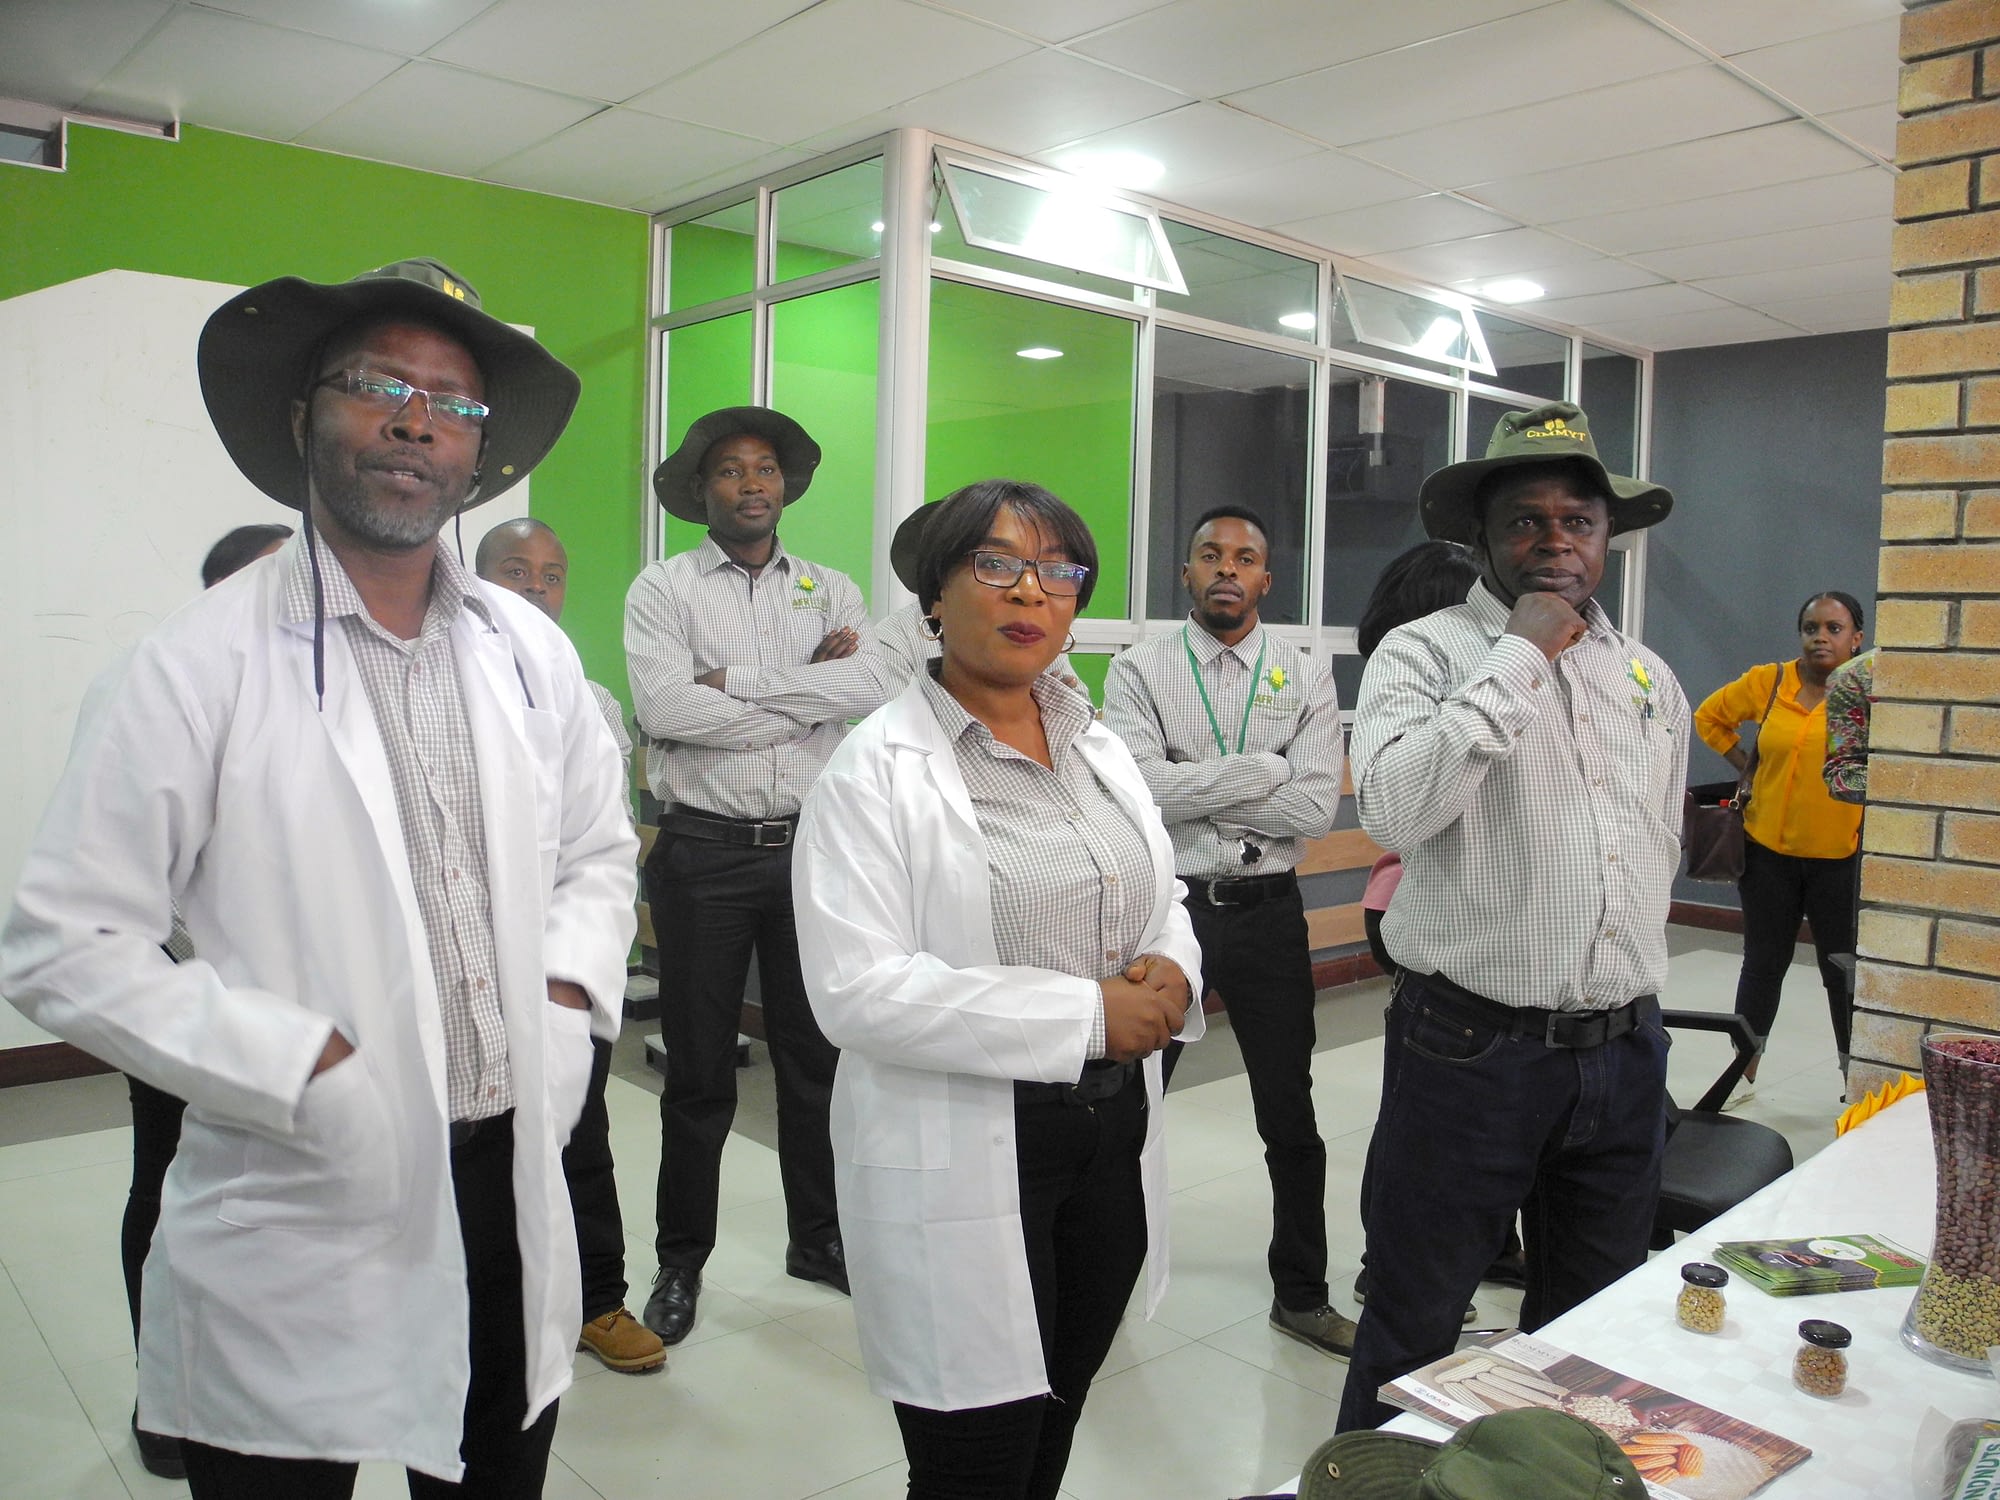 Emmanuel Angomwile (left) and Stephanie Angomwile (center) answer visitors’ questions at their seed company, Afriseed. (Photo: Jennifer Johnson/CIMMYT)